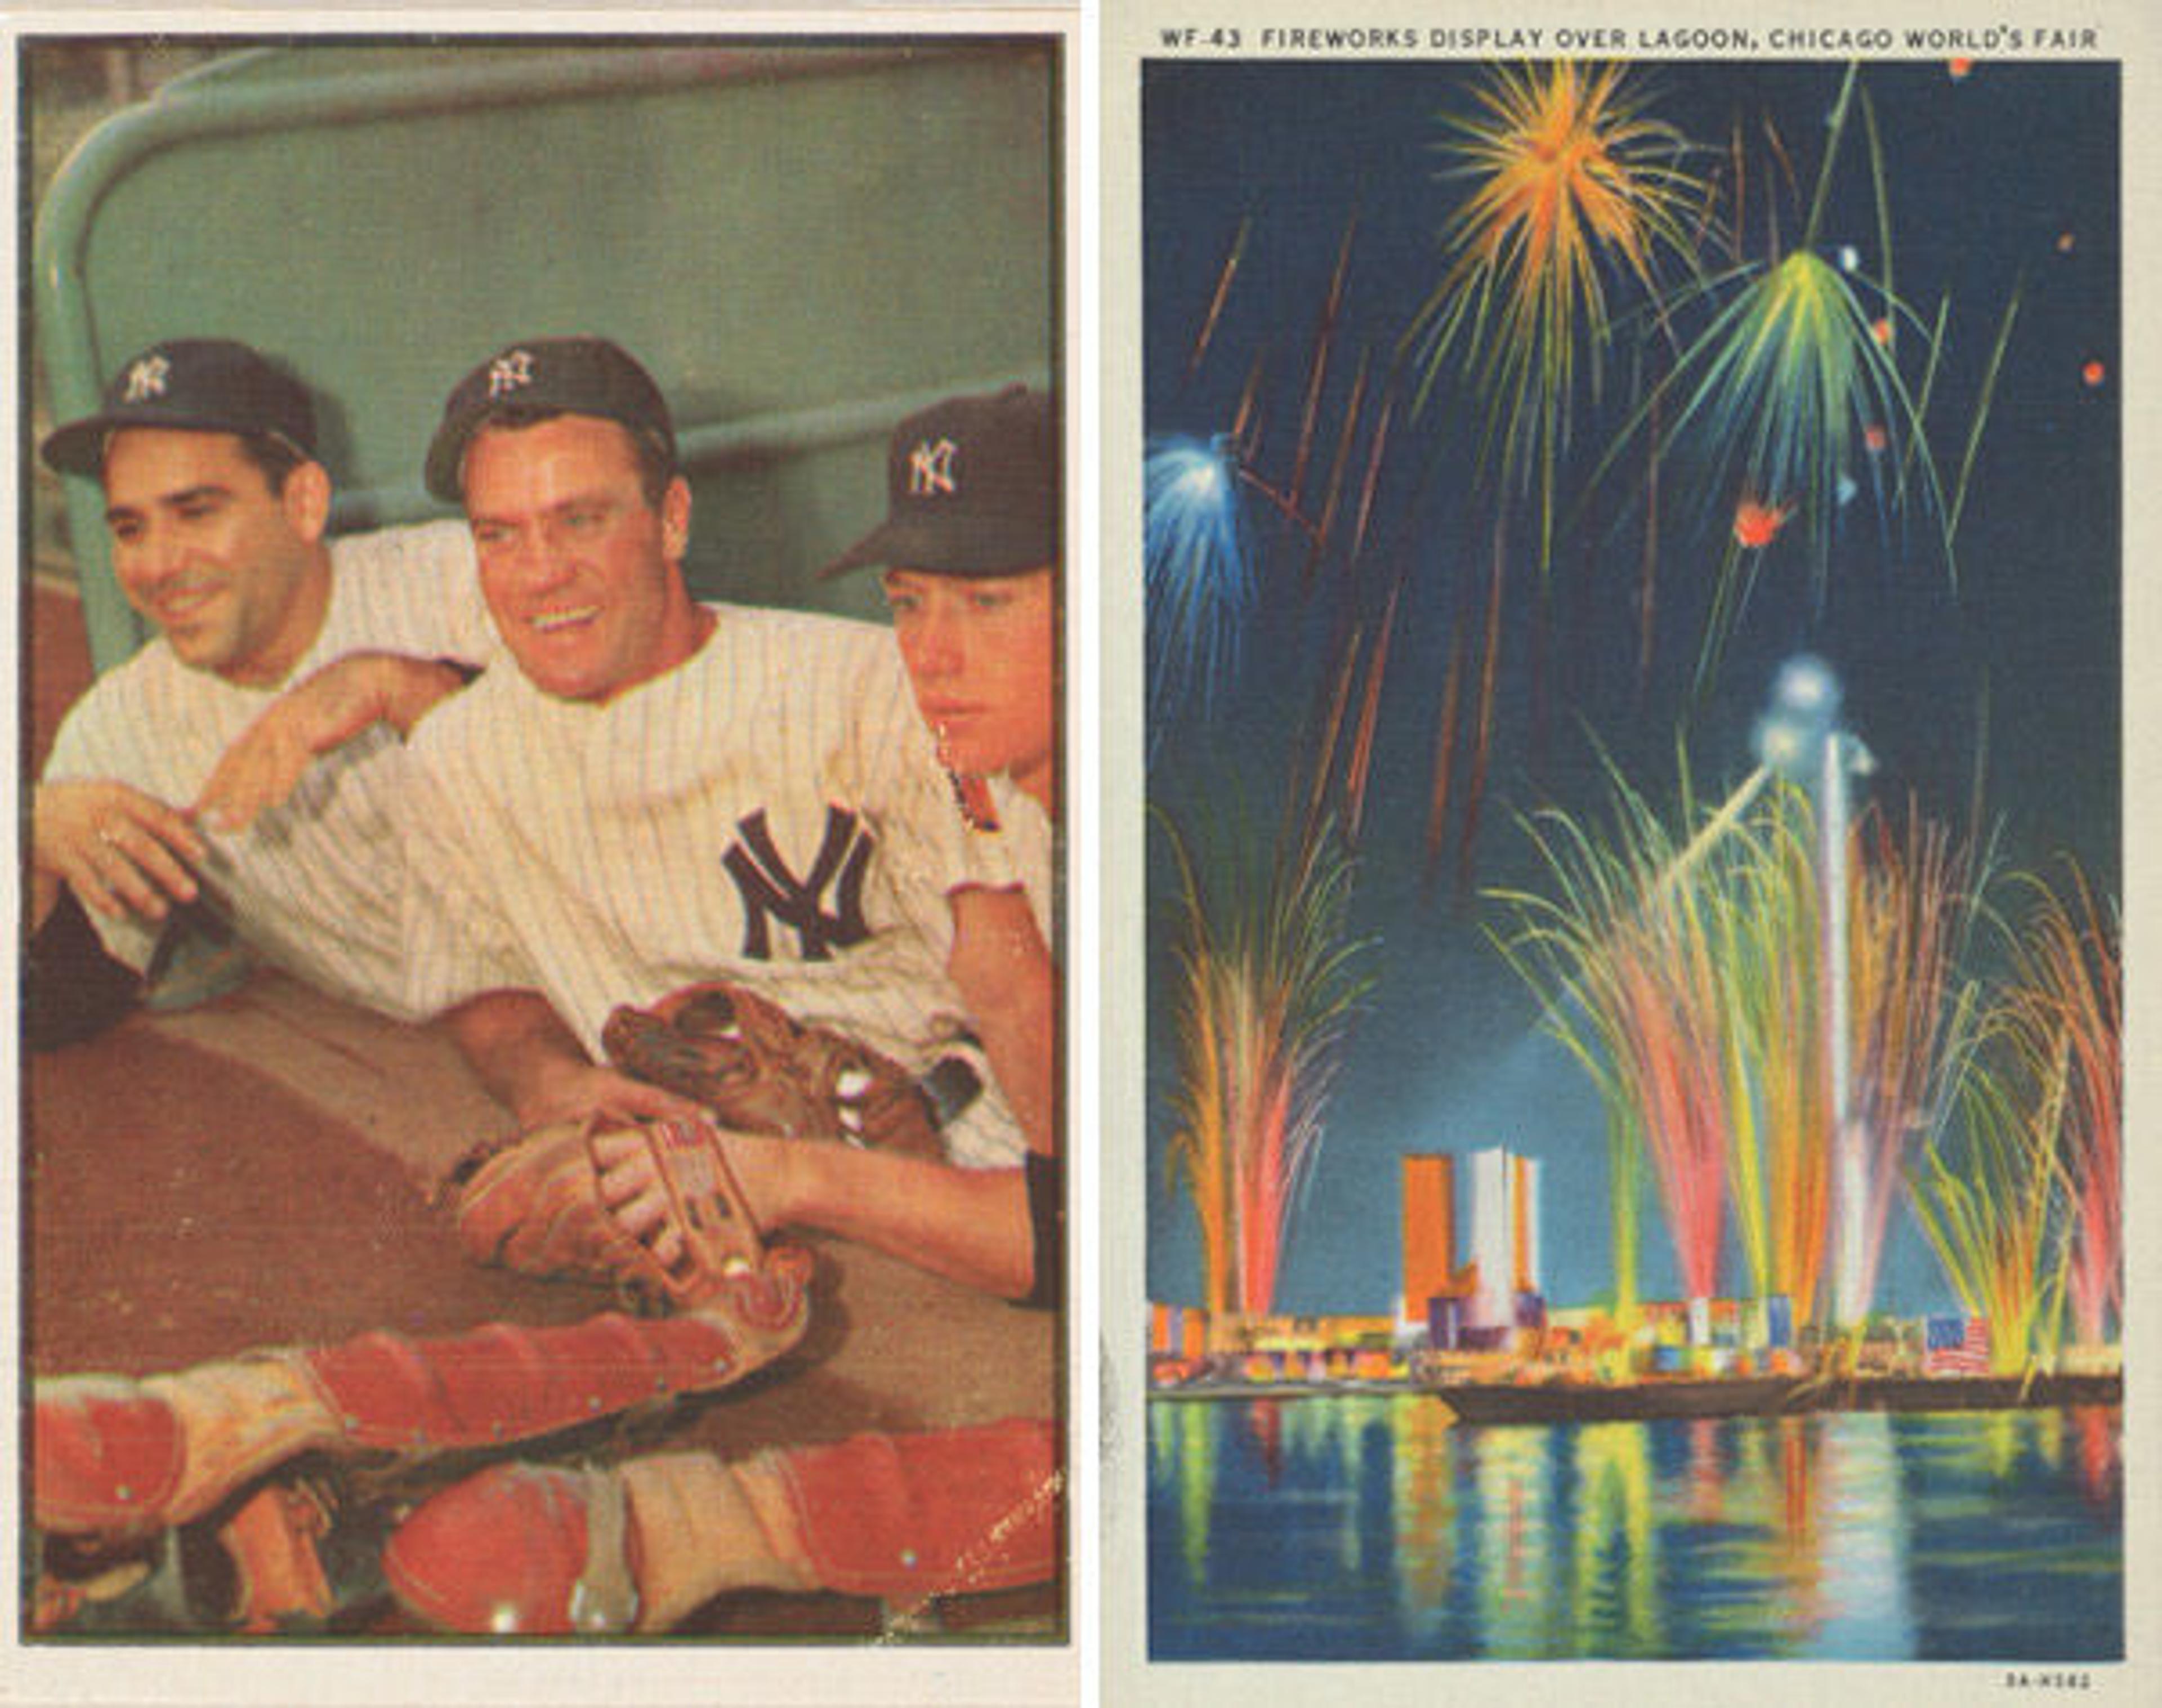 Left: Issued by Bowman Gum Company. Hank Bauer, Outfield, Yogi Berra, Catcher, Mickey Mantle, Outfield, New York Yankees, from Collector series, Colors set, series 7 (R406-7) issued by Bowman Gum, 1953. Commerical color lithograph; Sheet: 3 3/4 × 2 1/2 in. (9.5 × 6.3 cm). The Metropolitan Museum of Art, New York, The Jefferson R. Burdick Collection, Gift of Jefferson R. Burdick (Burdick 327, R406-7.44). Right: Issued by Kinney Brothers (American). Card No. 74, Belgian Carrier Pigeon, With Its Message in Code, from the World War I Scenes series (T121) issued by Sweet Caporal Cigarettes (detail), ca. 1914. Photolithograph; Sheet: 2 5/8 x 1 9/16 in. (6.7 x 3.9 cm). The Metropolitan Museum of Art, New York, The Jefferson R. Burdick Collection, Gift of Jefferson R. Burdick (63.350.246.121.78)